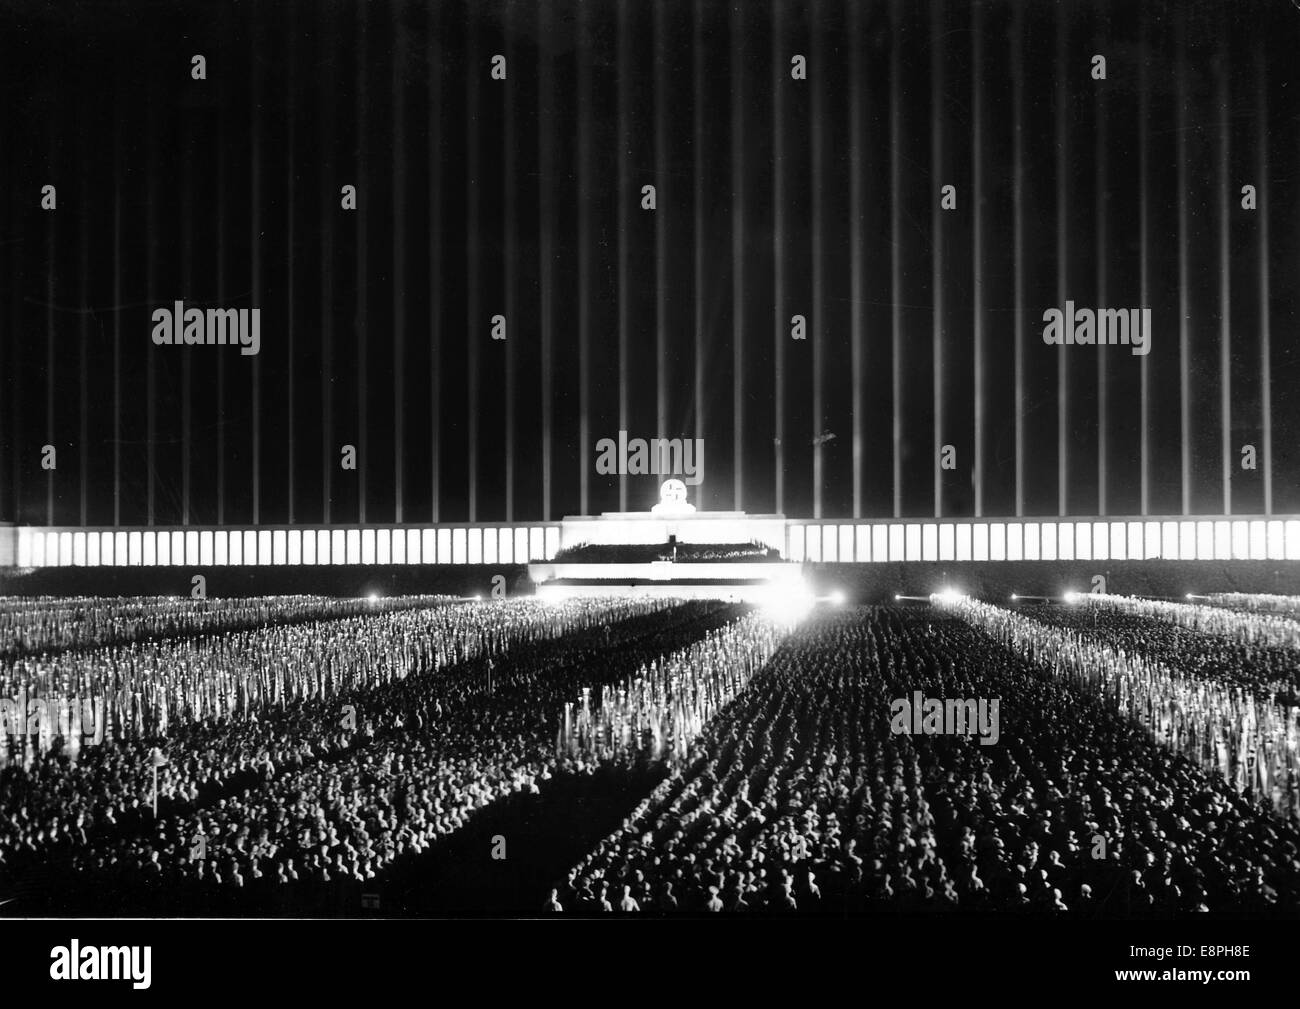 Nuremberg Rally 1937 in Nuremberg, Germany - View of the roll call of the political leaders of the Nazi party (NSDAP) on Zeppelin Field at the Nazi party rally grounds. Original propaganda text! from Nazi news reporting on the back of the picture: 'The great roll call of the political leaders took place this evening, 110,000 of whom had fallen into formation in twelve enormous blocks. The searchlights suddenly flared up and created a fantastic colour symphony in an overwhelming rapture of light in brown and red and white, in glittering silver and gold. Our picture: The magically illuminated Ze Stock Photo